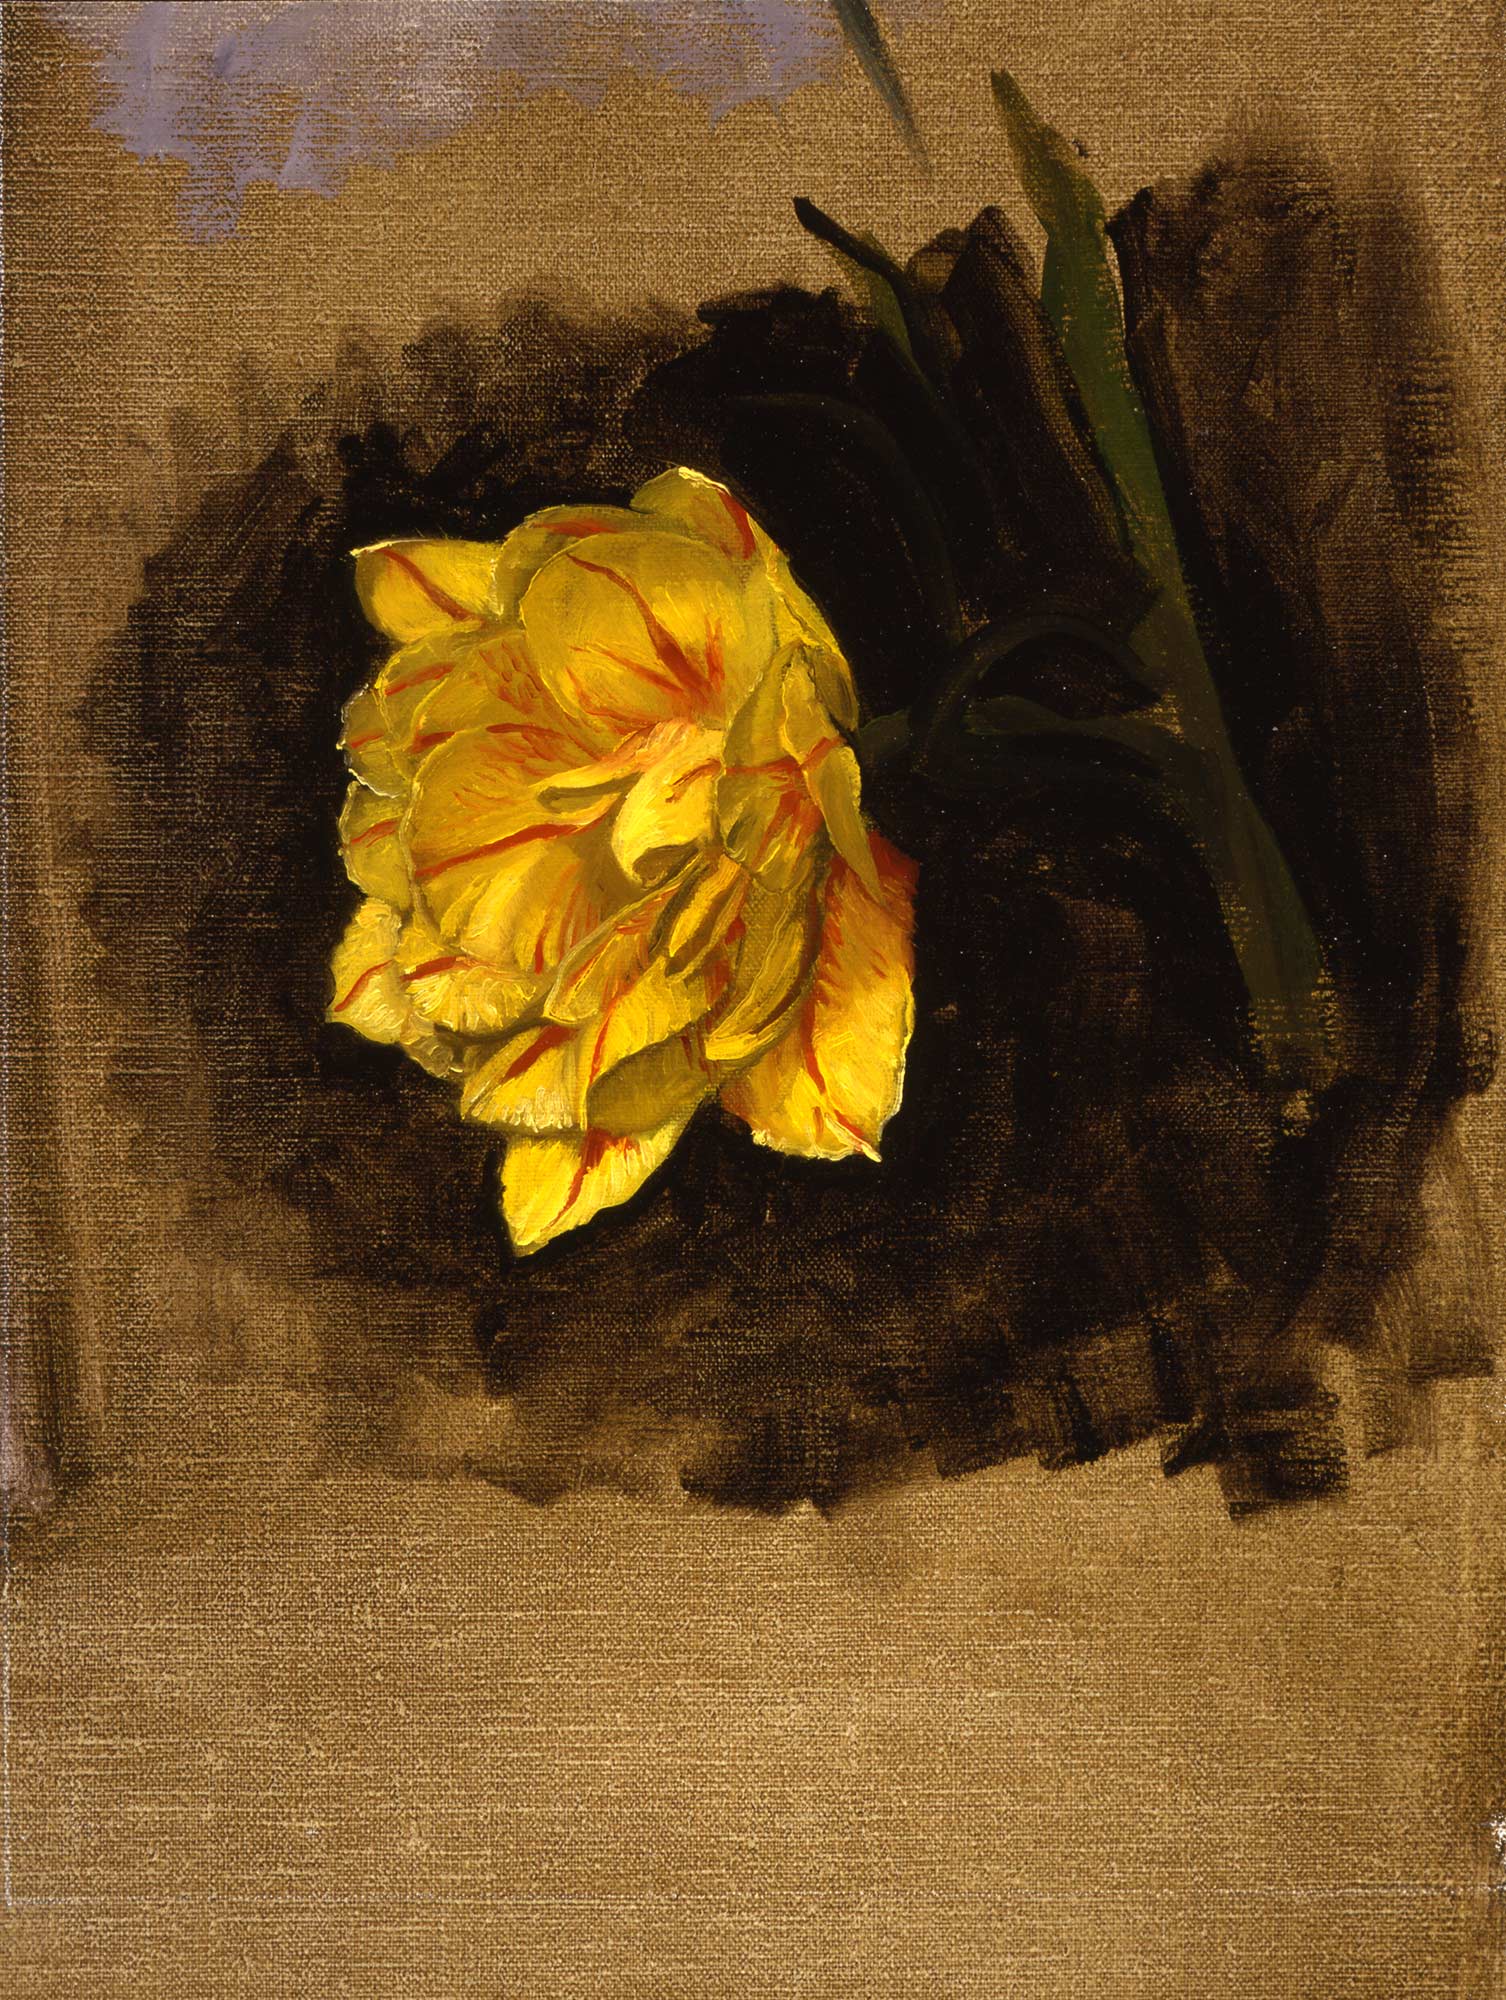 Study of a Double Tulip